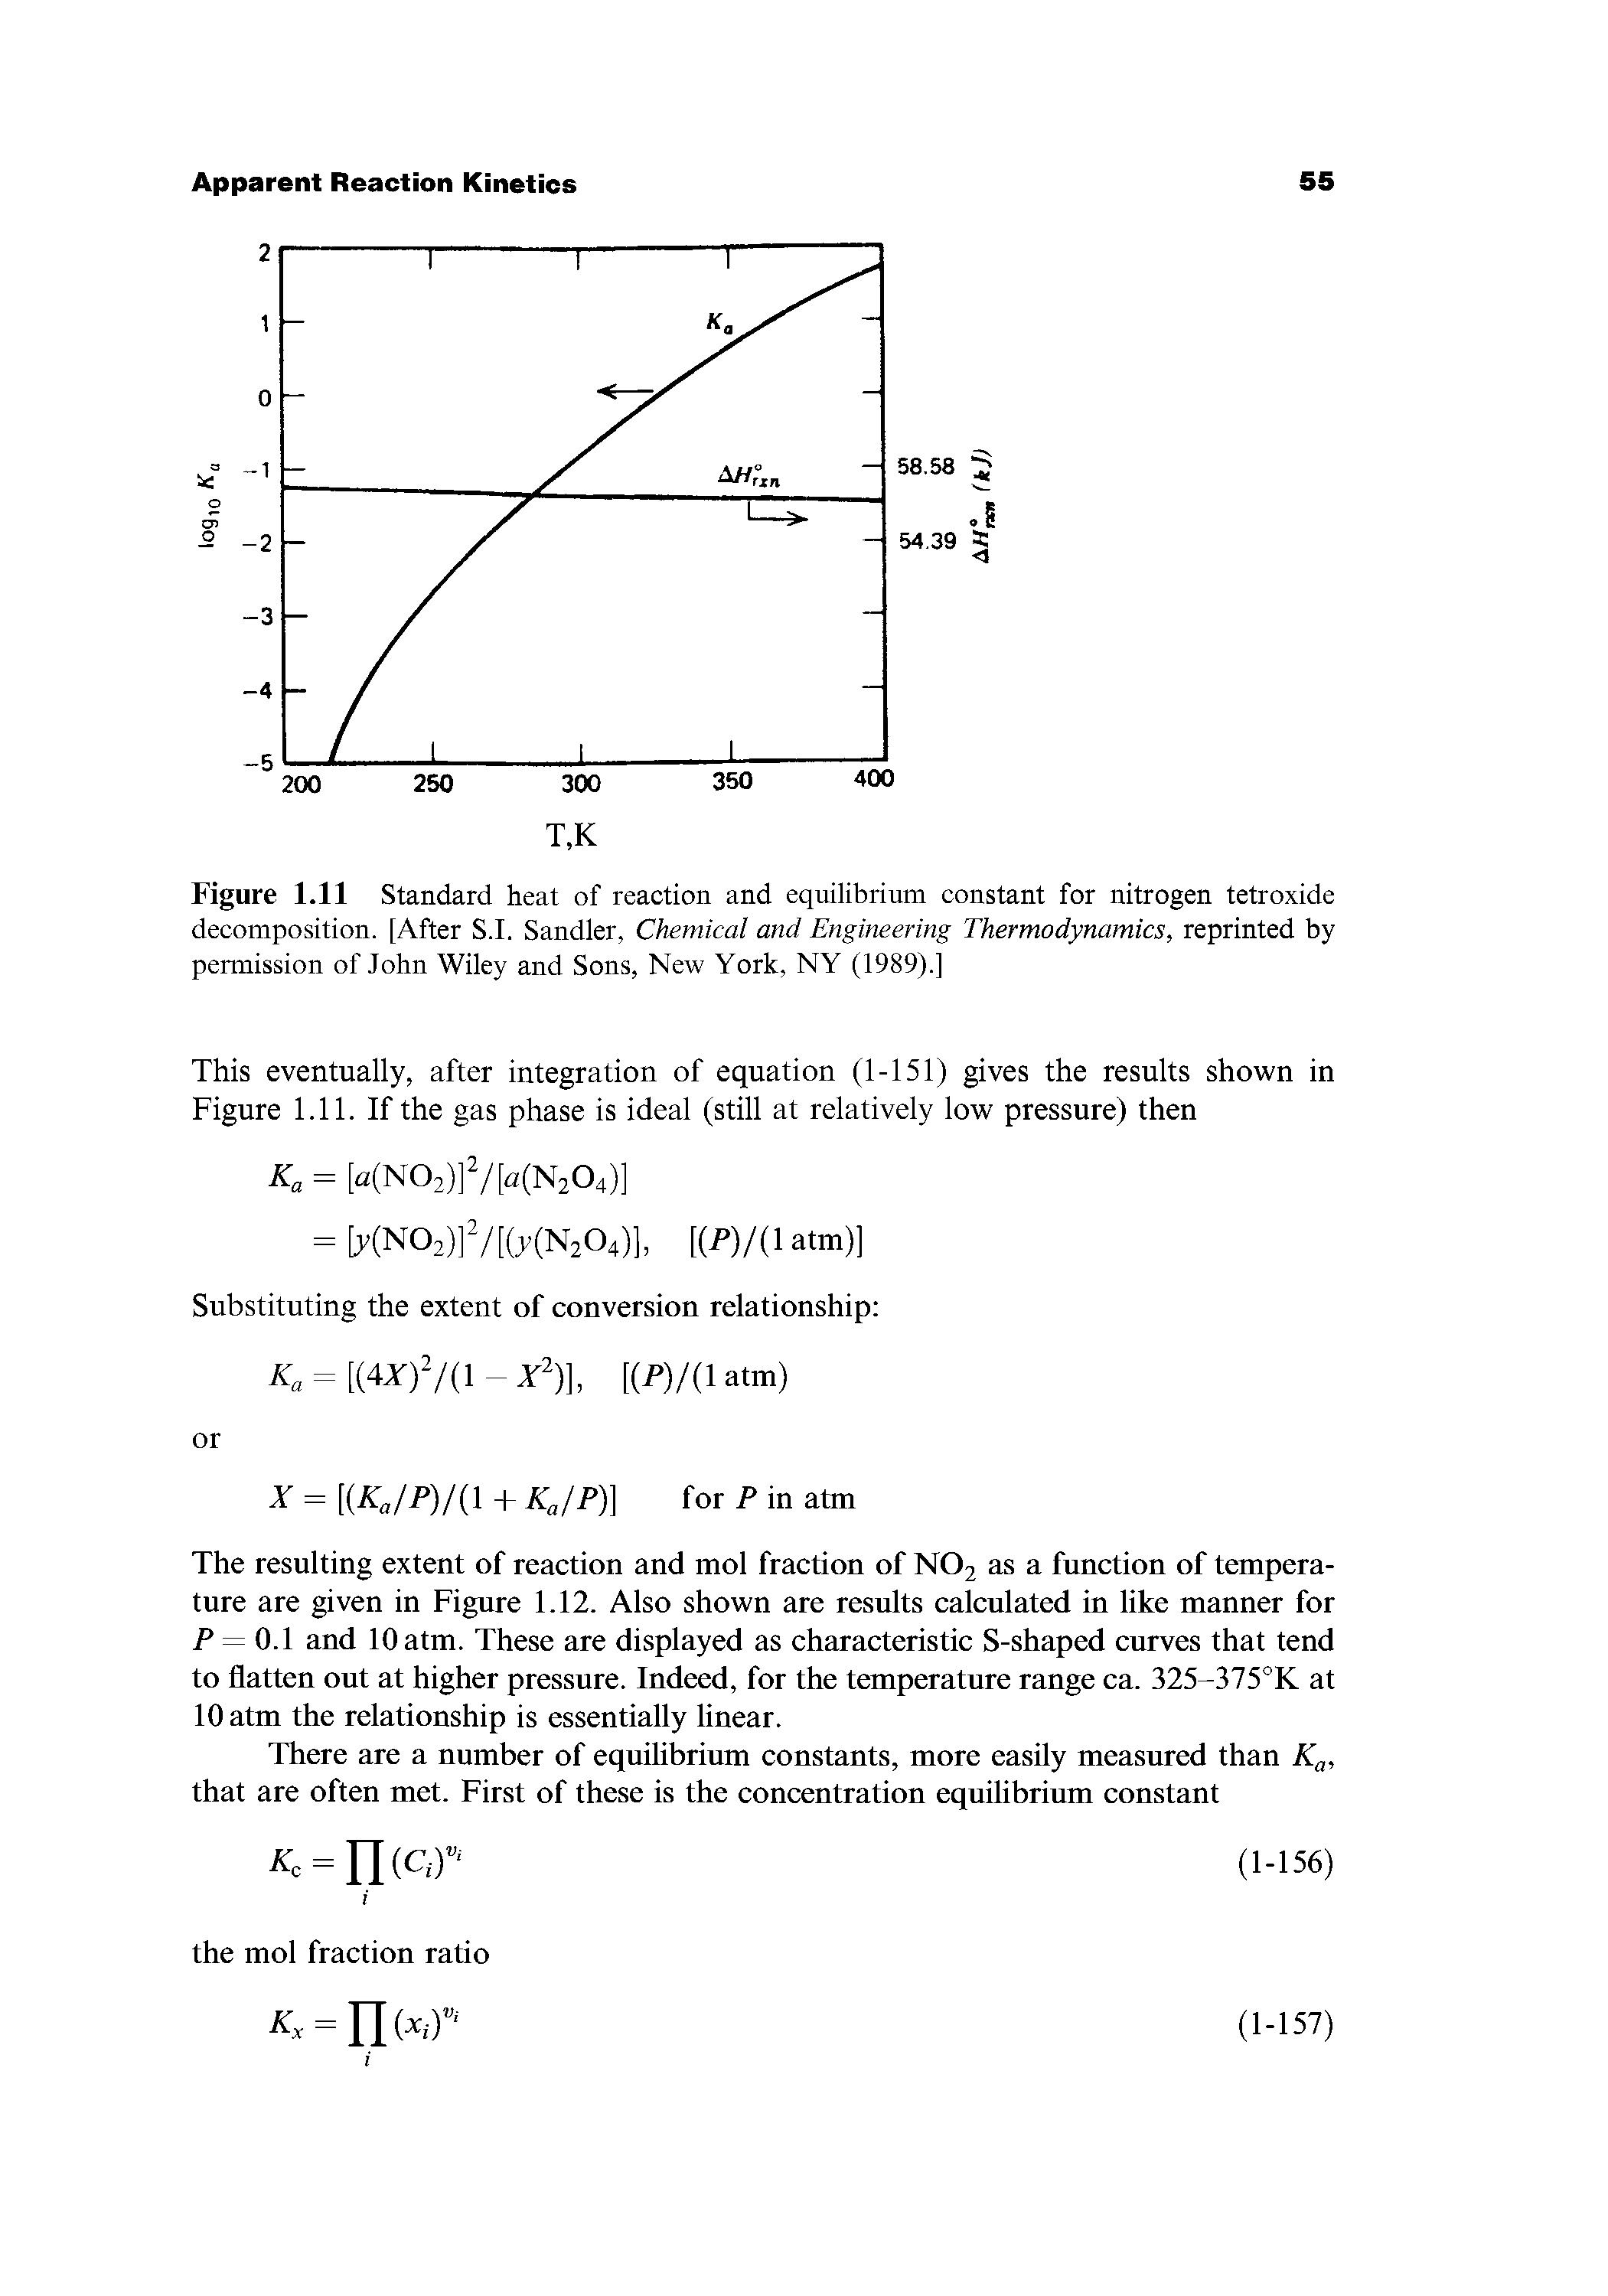 Figure 1.11 Standard heat of reaction and equilibrium constant for nitrogen tetroxide decomposition. [After S.I. Sandler, Chemical and Engineering Thermodynamics, reprinted by permission of John Wiley and Sons, New York, NY (1989).]...